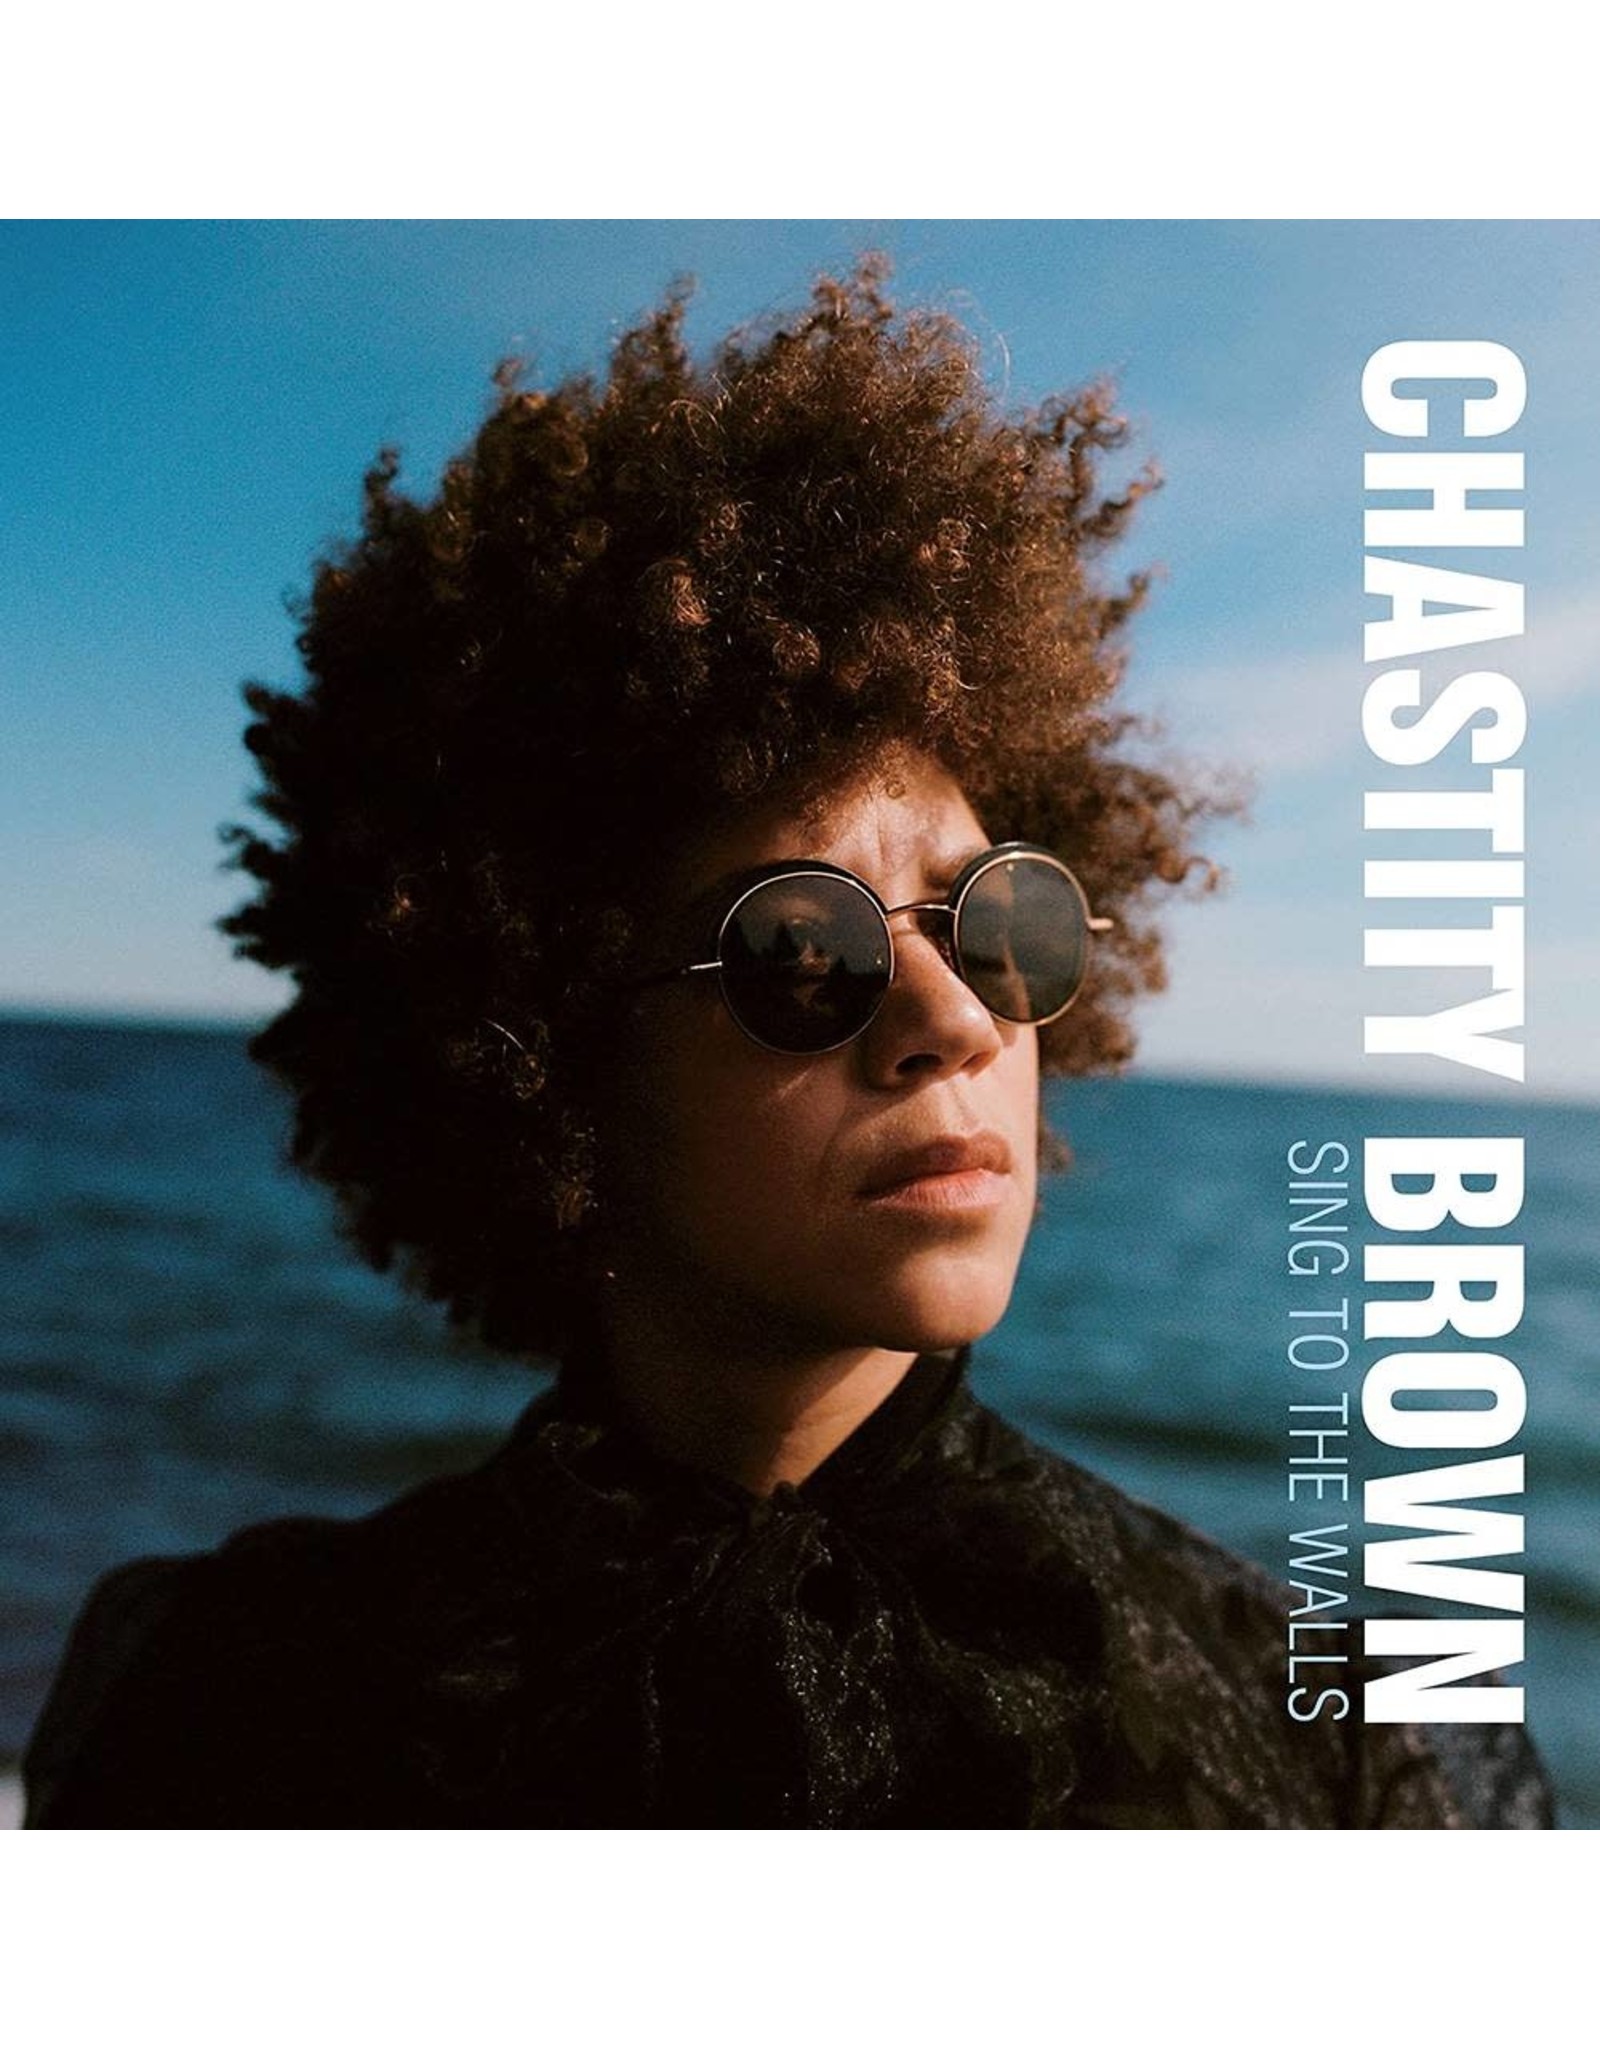 Brown, Chastity / Sing to the Walls (Ltd, red vinyl)